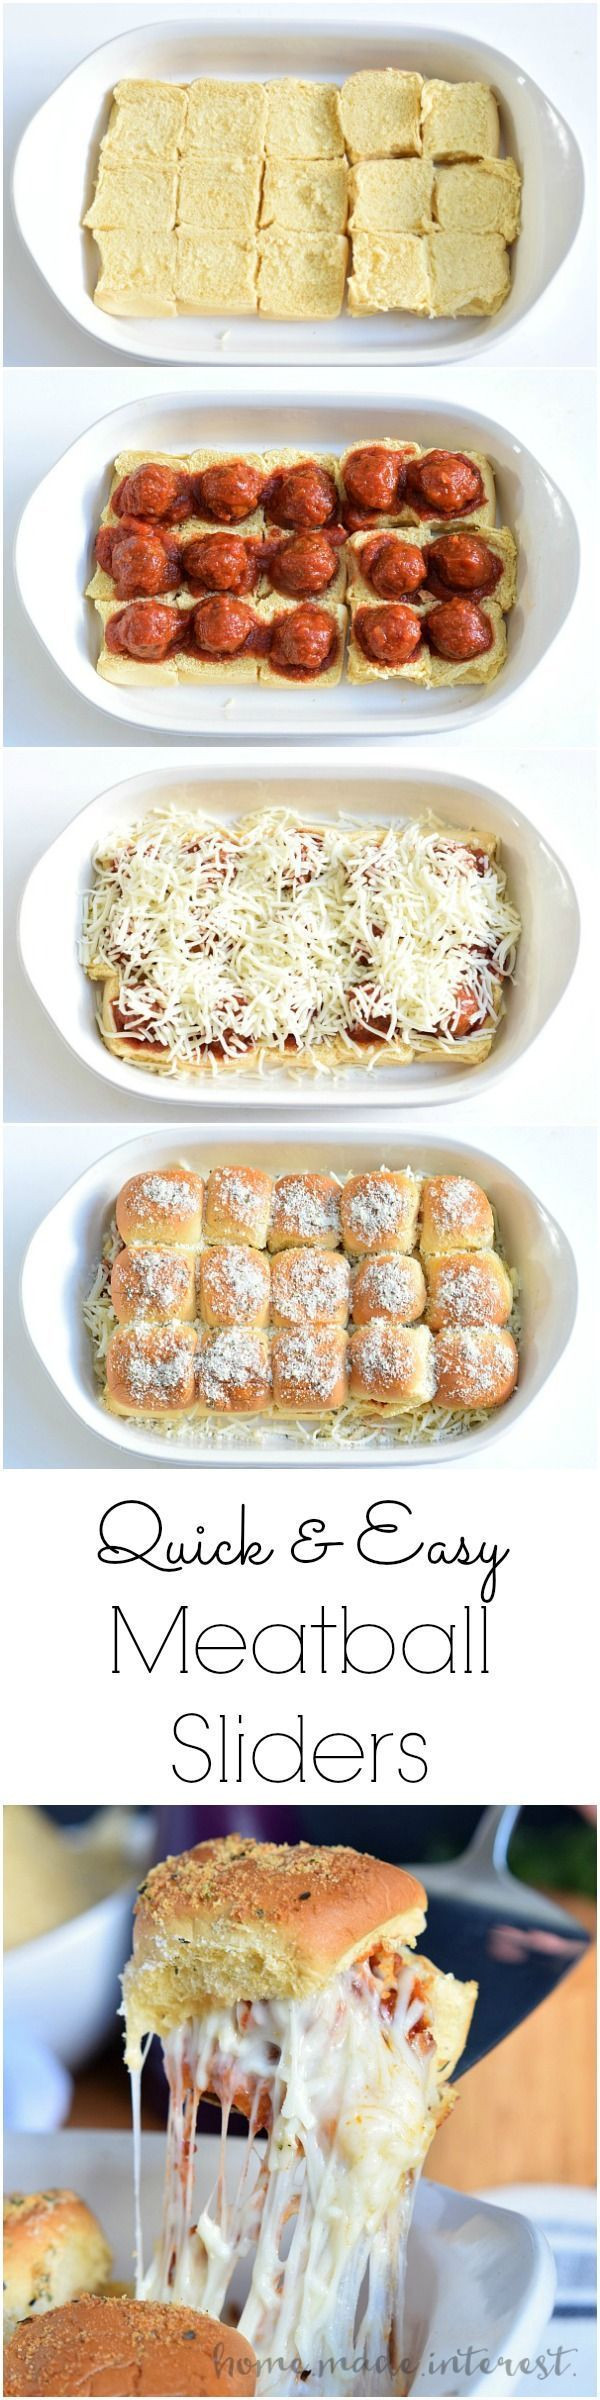 Football Dinners Recipes
 318 best Football Party Ideas images on Pinterest